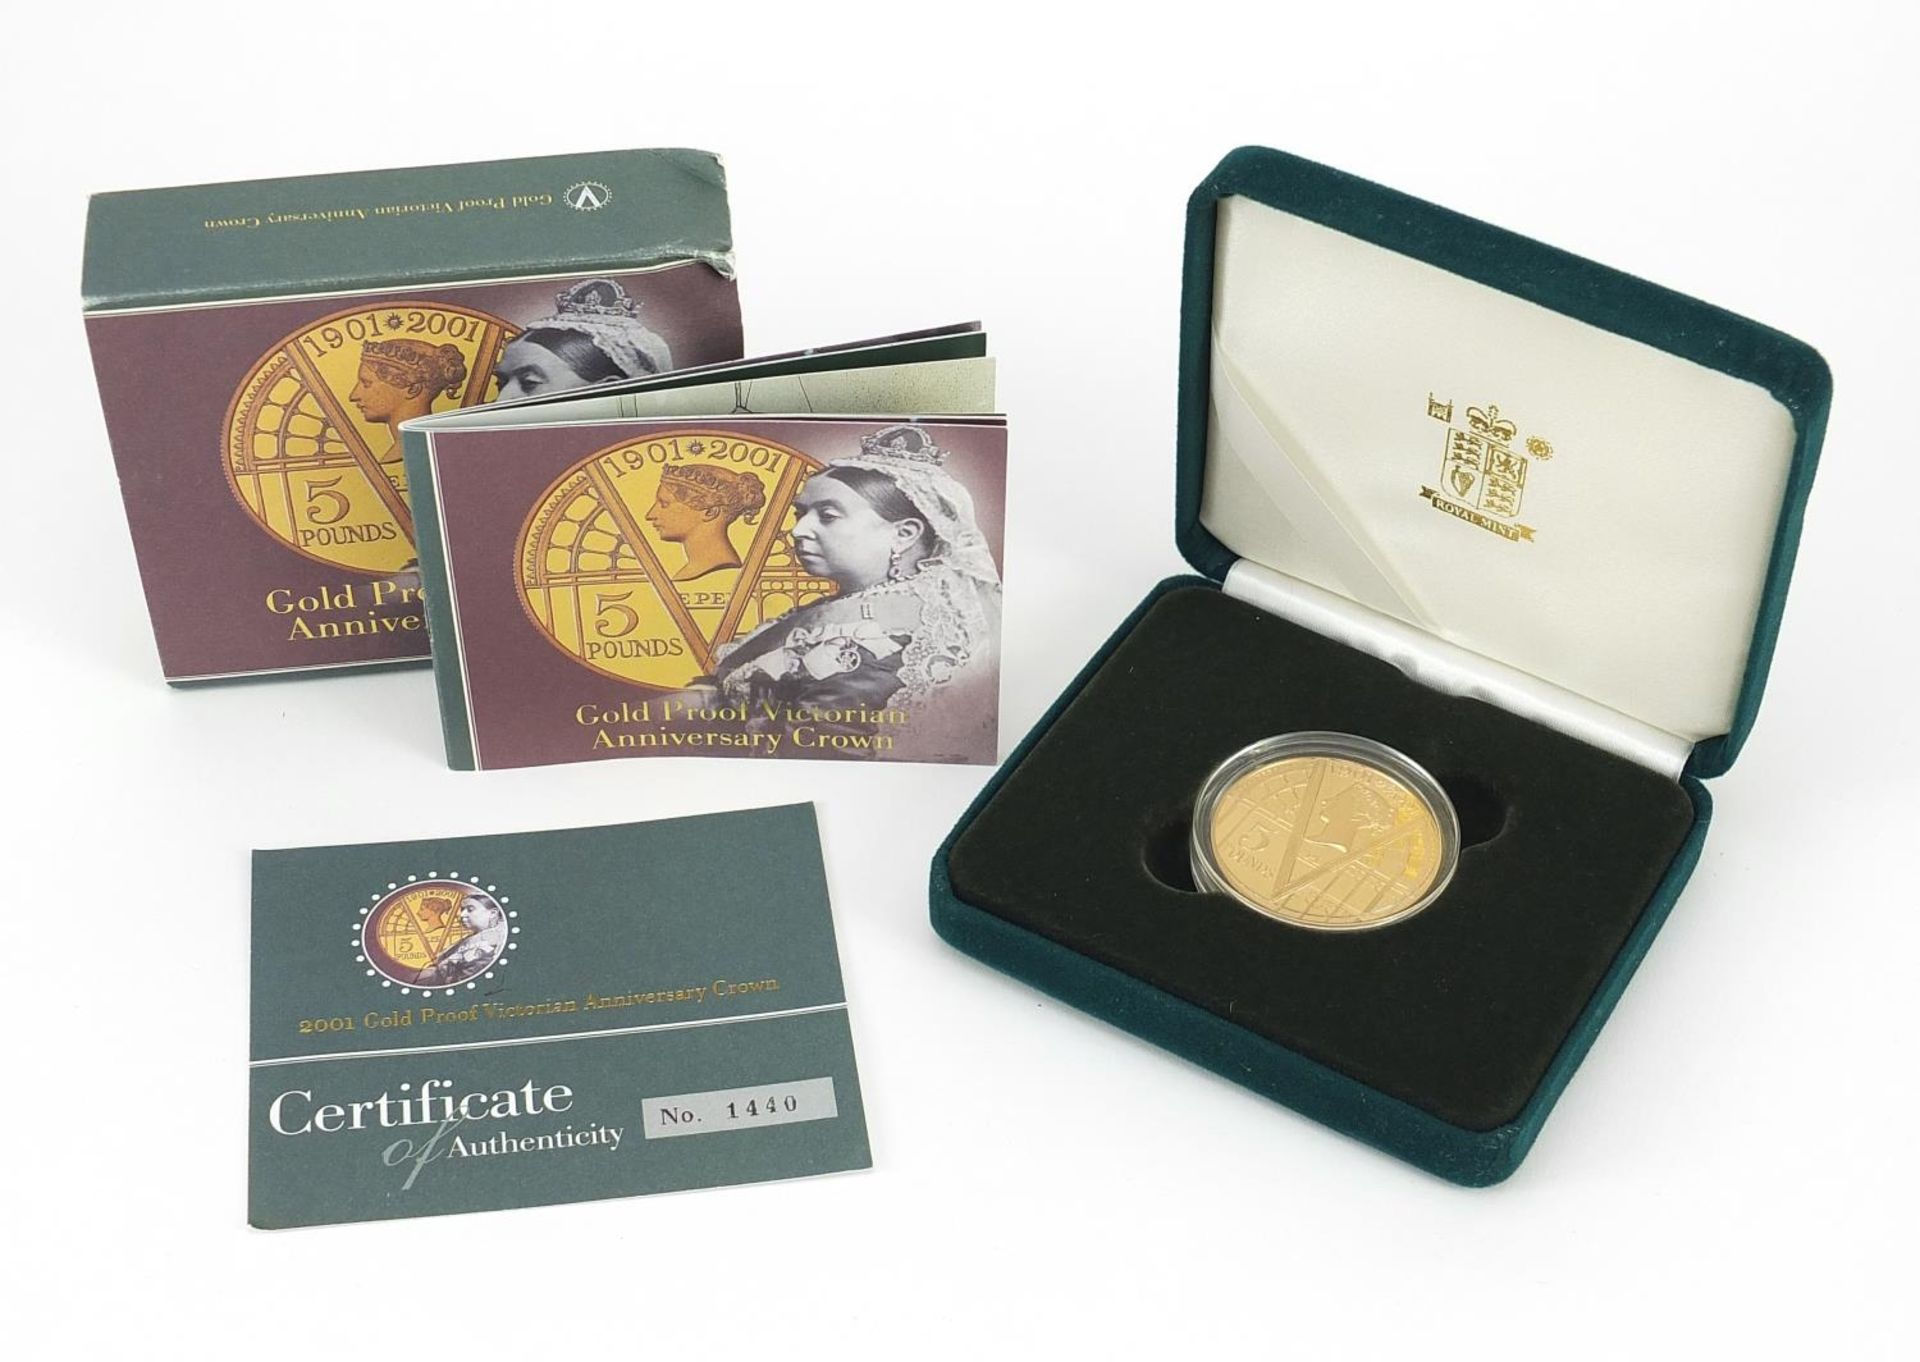 Elizabeth II 2001 uncirculated gold five pound coin with box and certificate numbered 1440 - this - Image 3 of 4